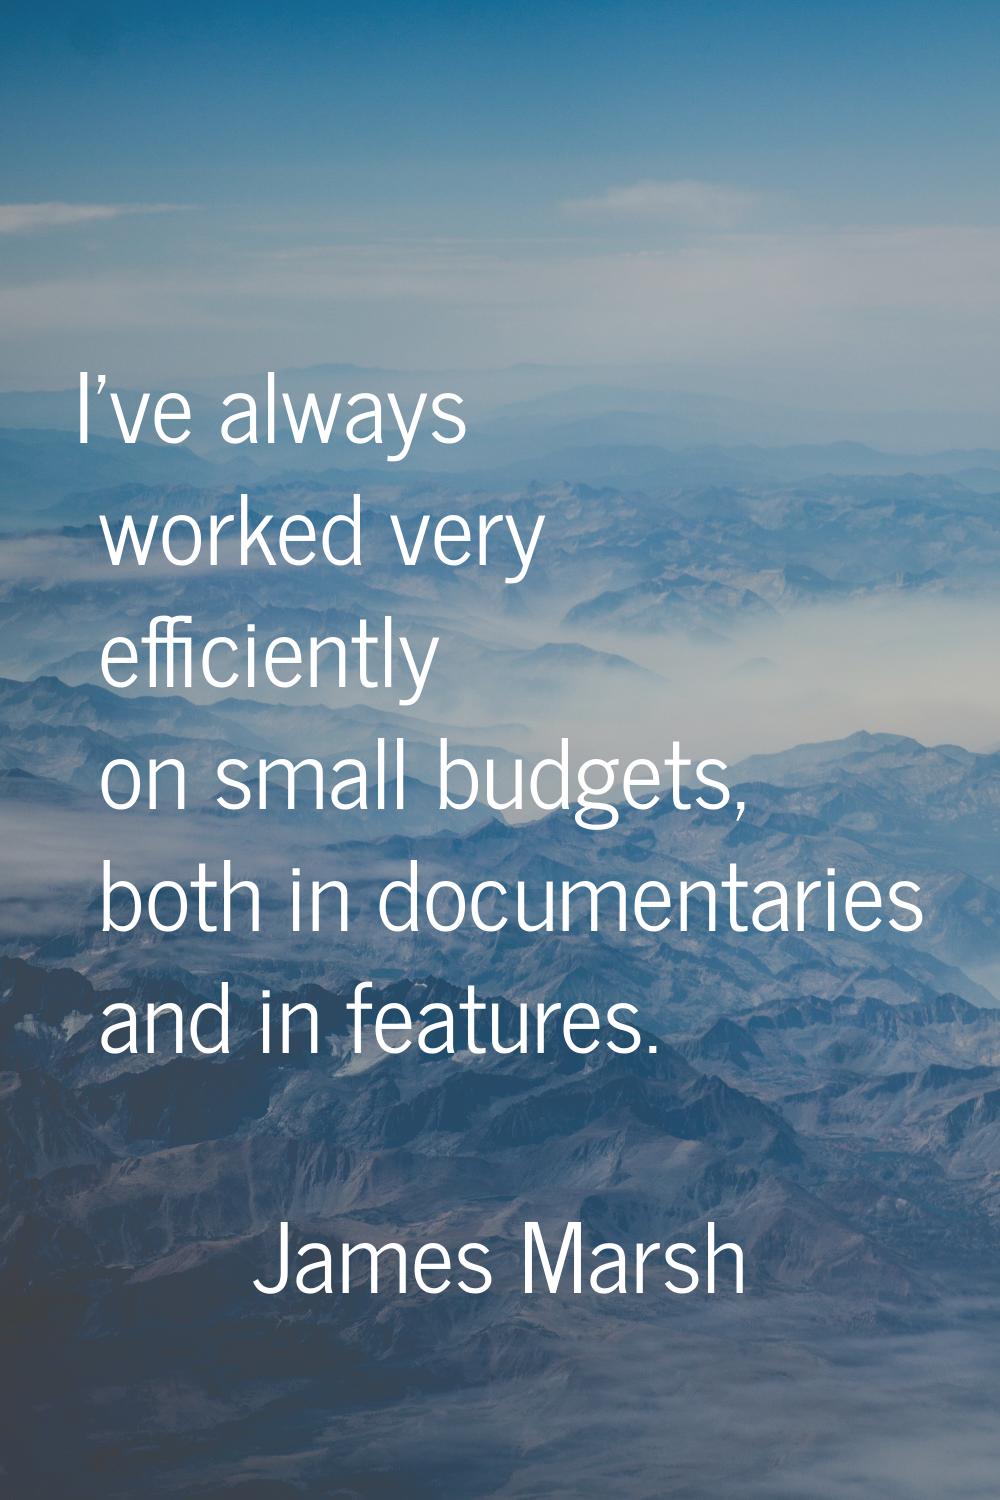 I've always worked very efficiently on small budgets, both in documentaries and in features.